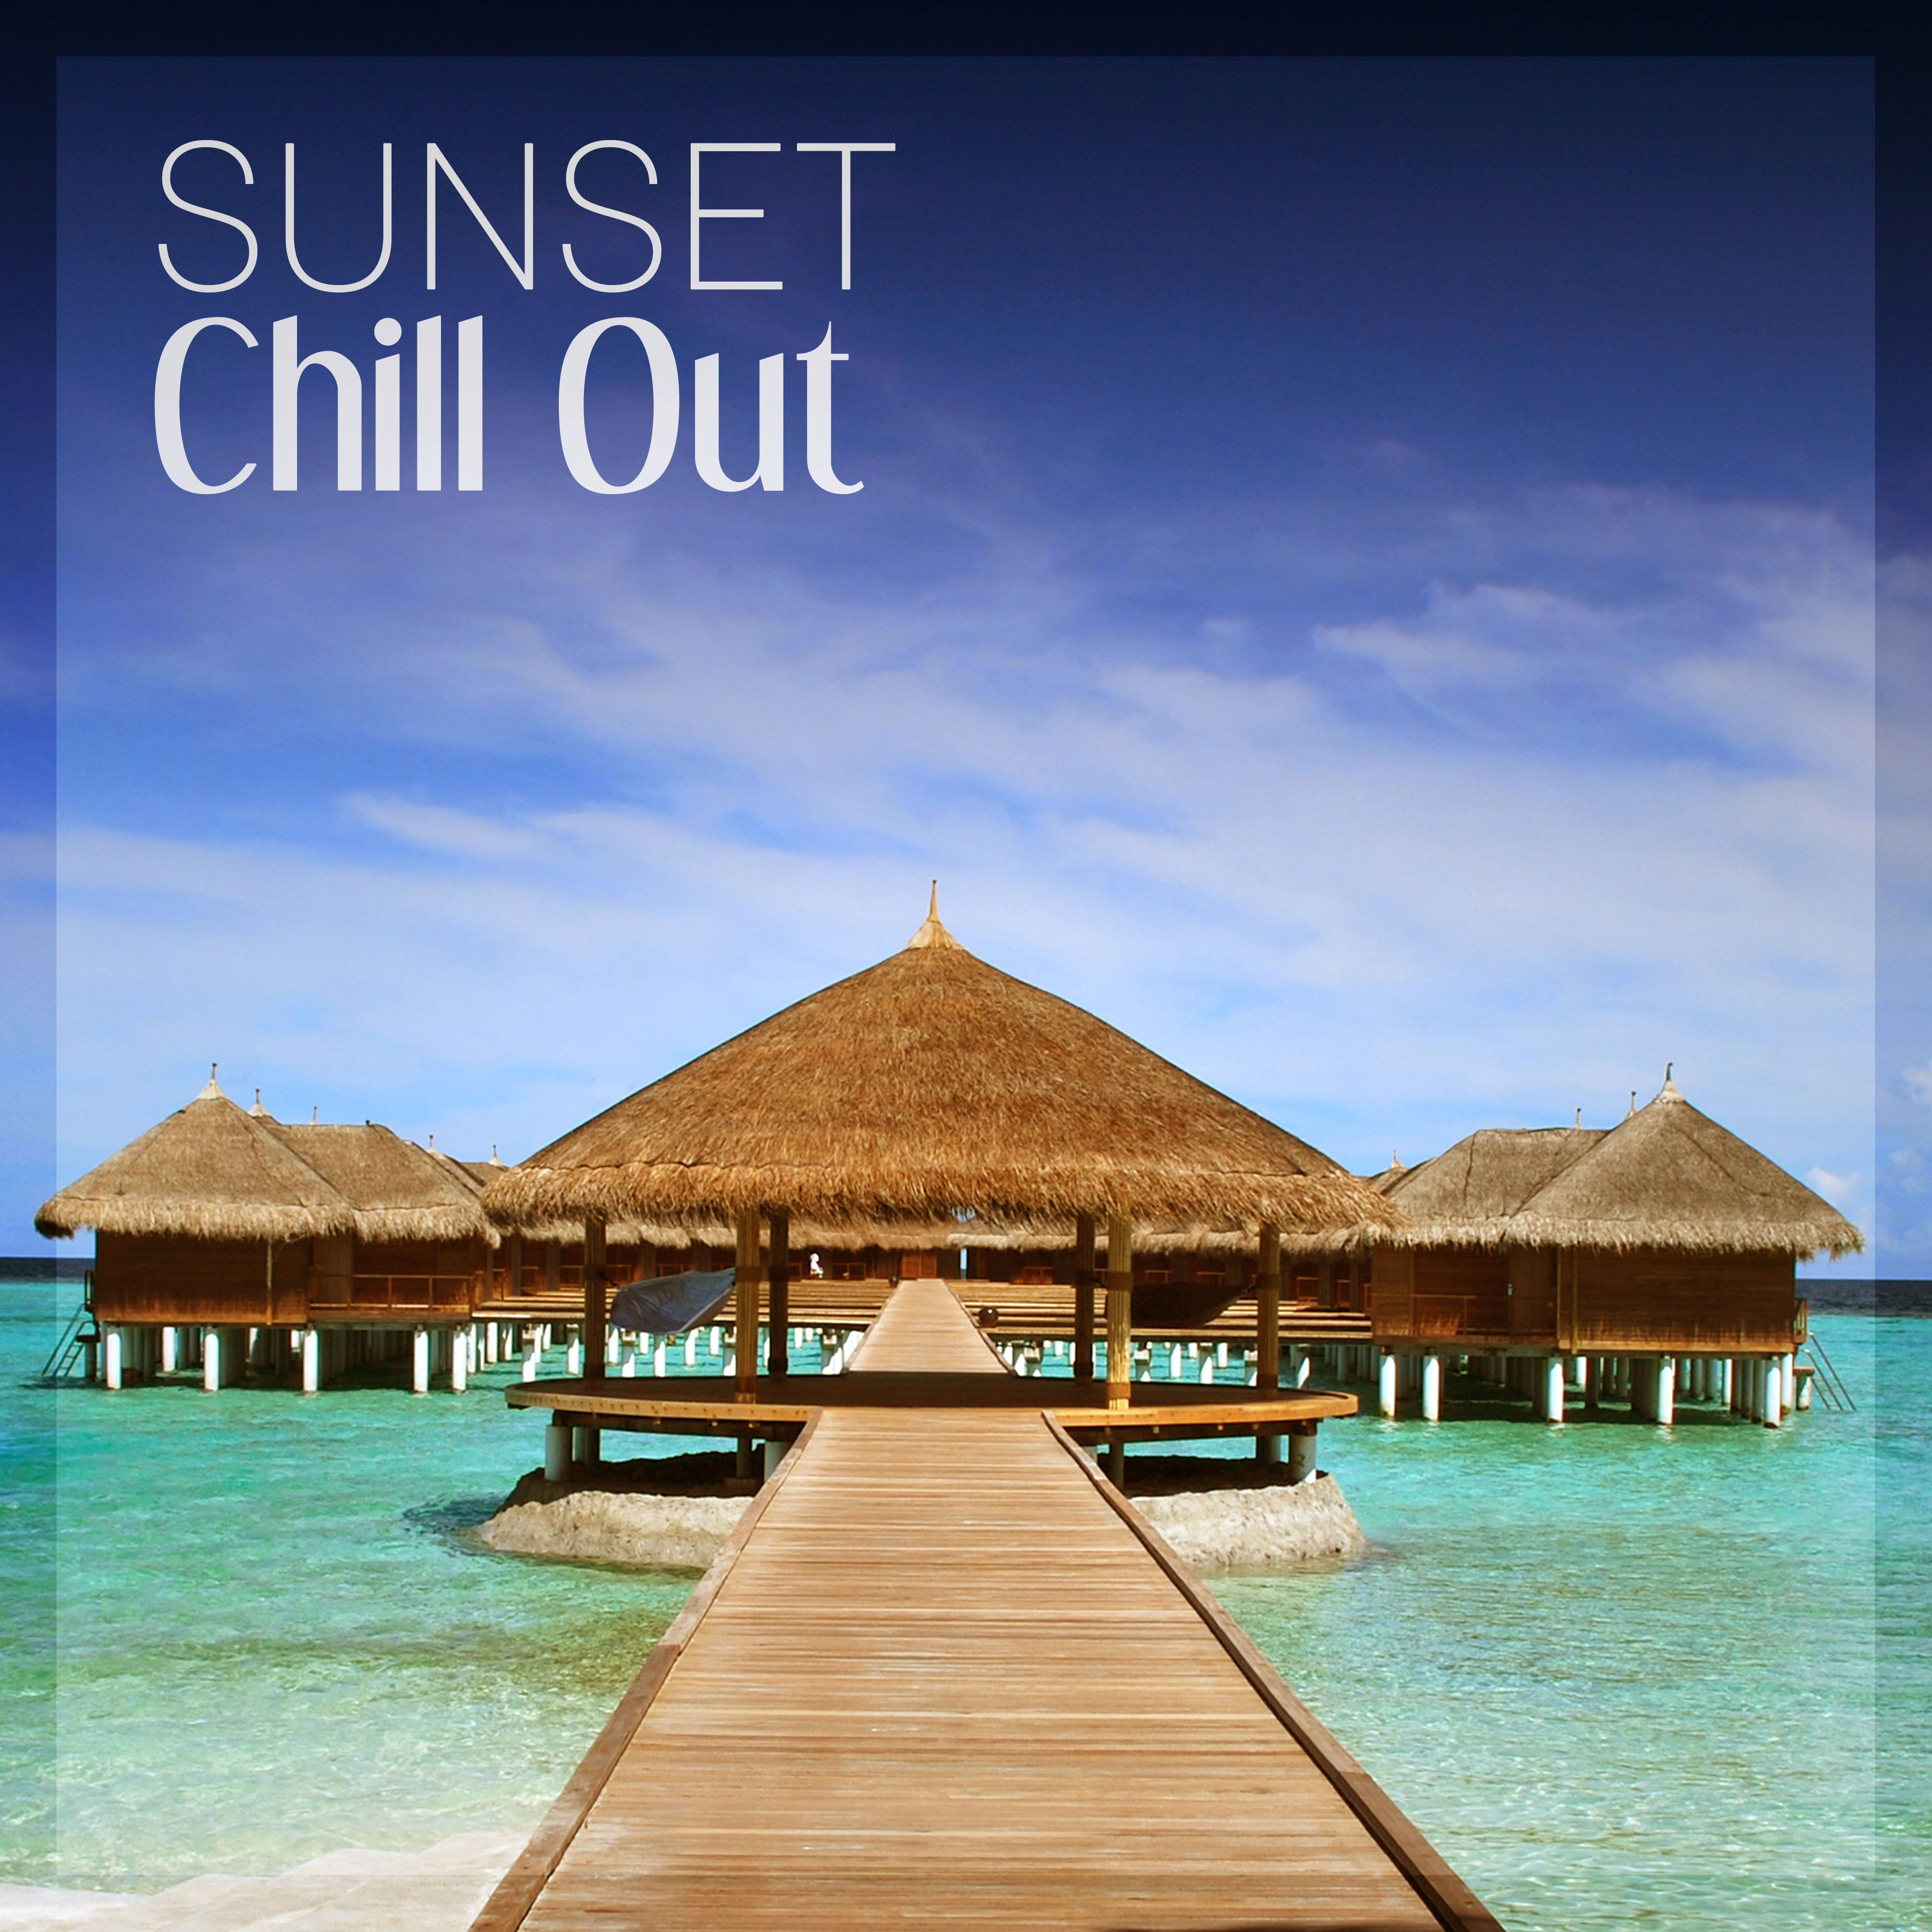 Sunset Chill Out - Deep Dive, Feel Positive Energy, Cafe Lounge Music, Chillout on the Beach, Chill Out Music